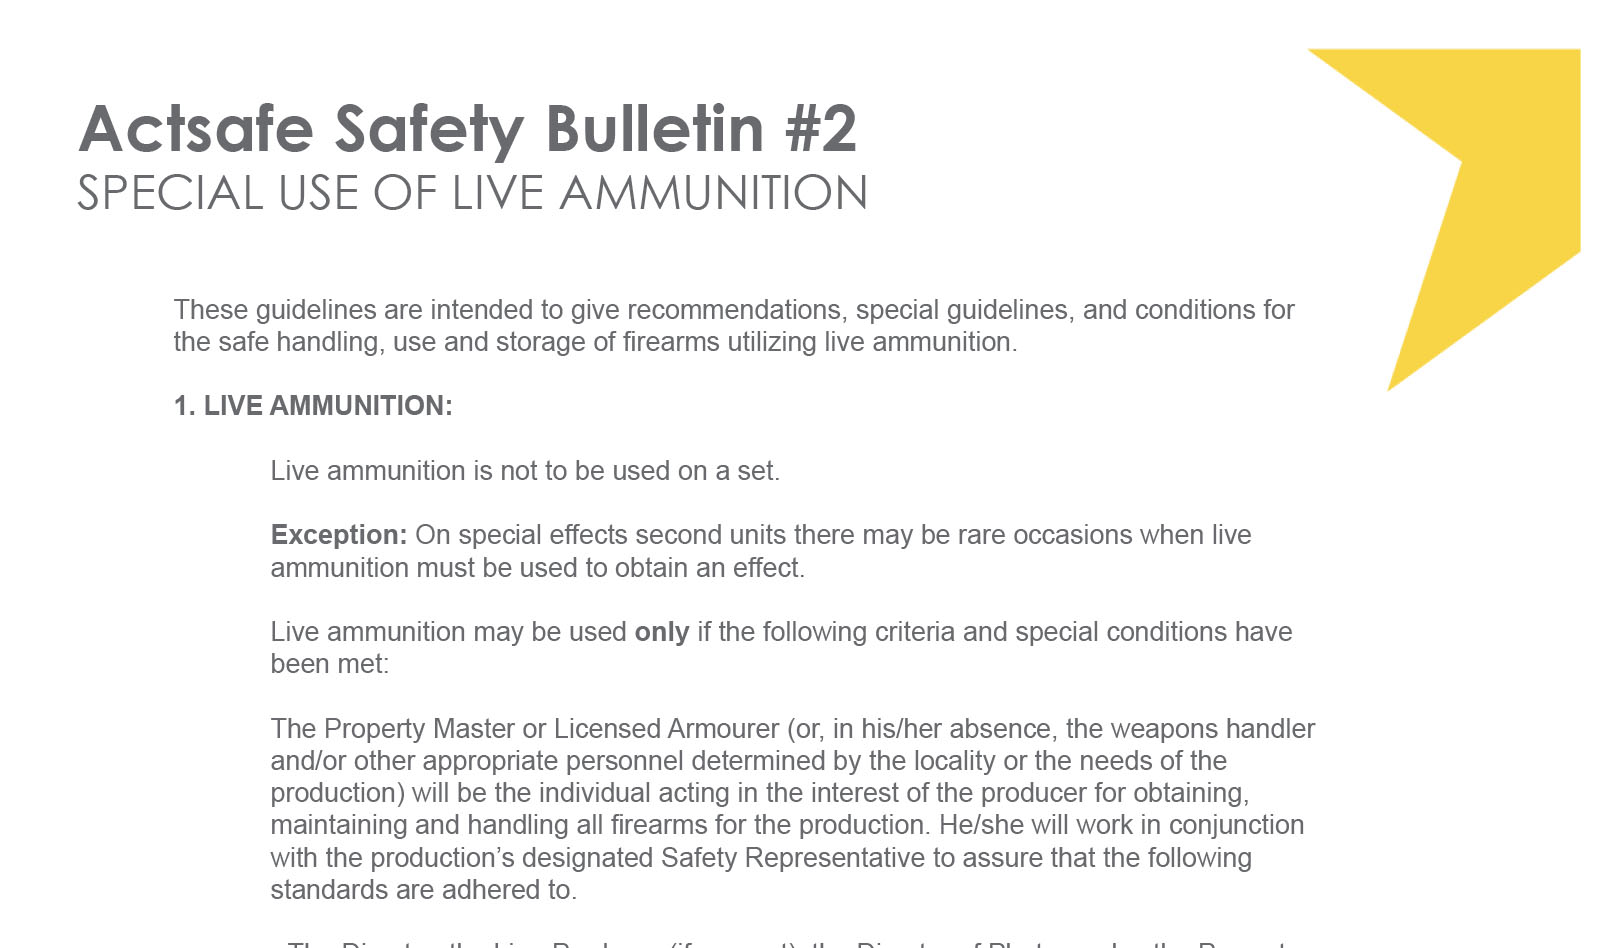 Special-use-of-live-ammunition-motion-picture-bulletin